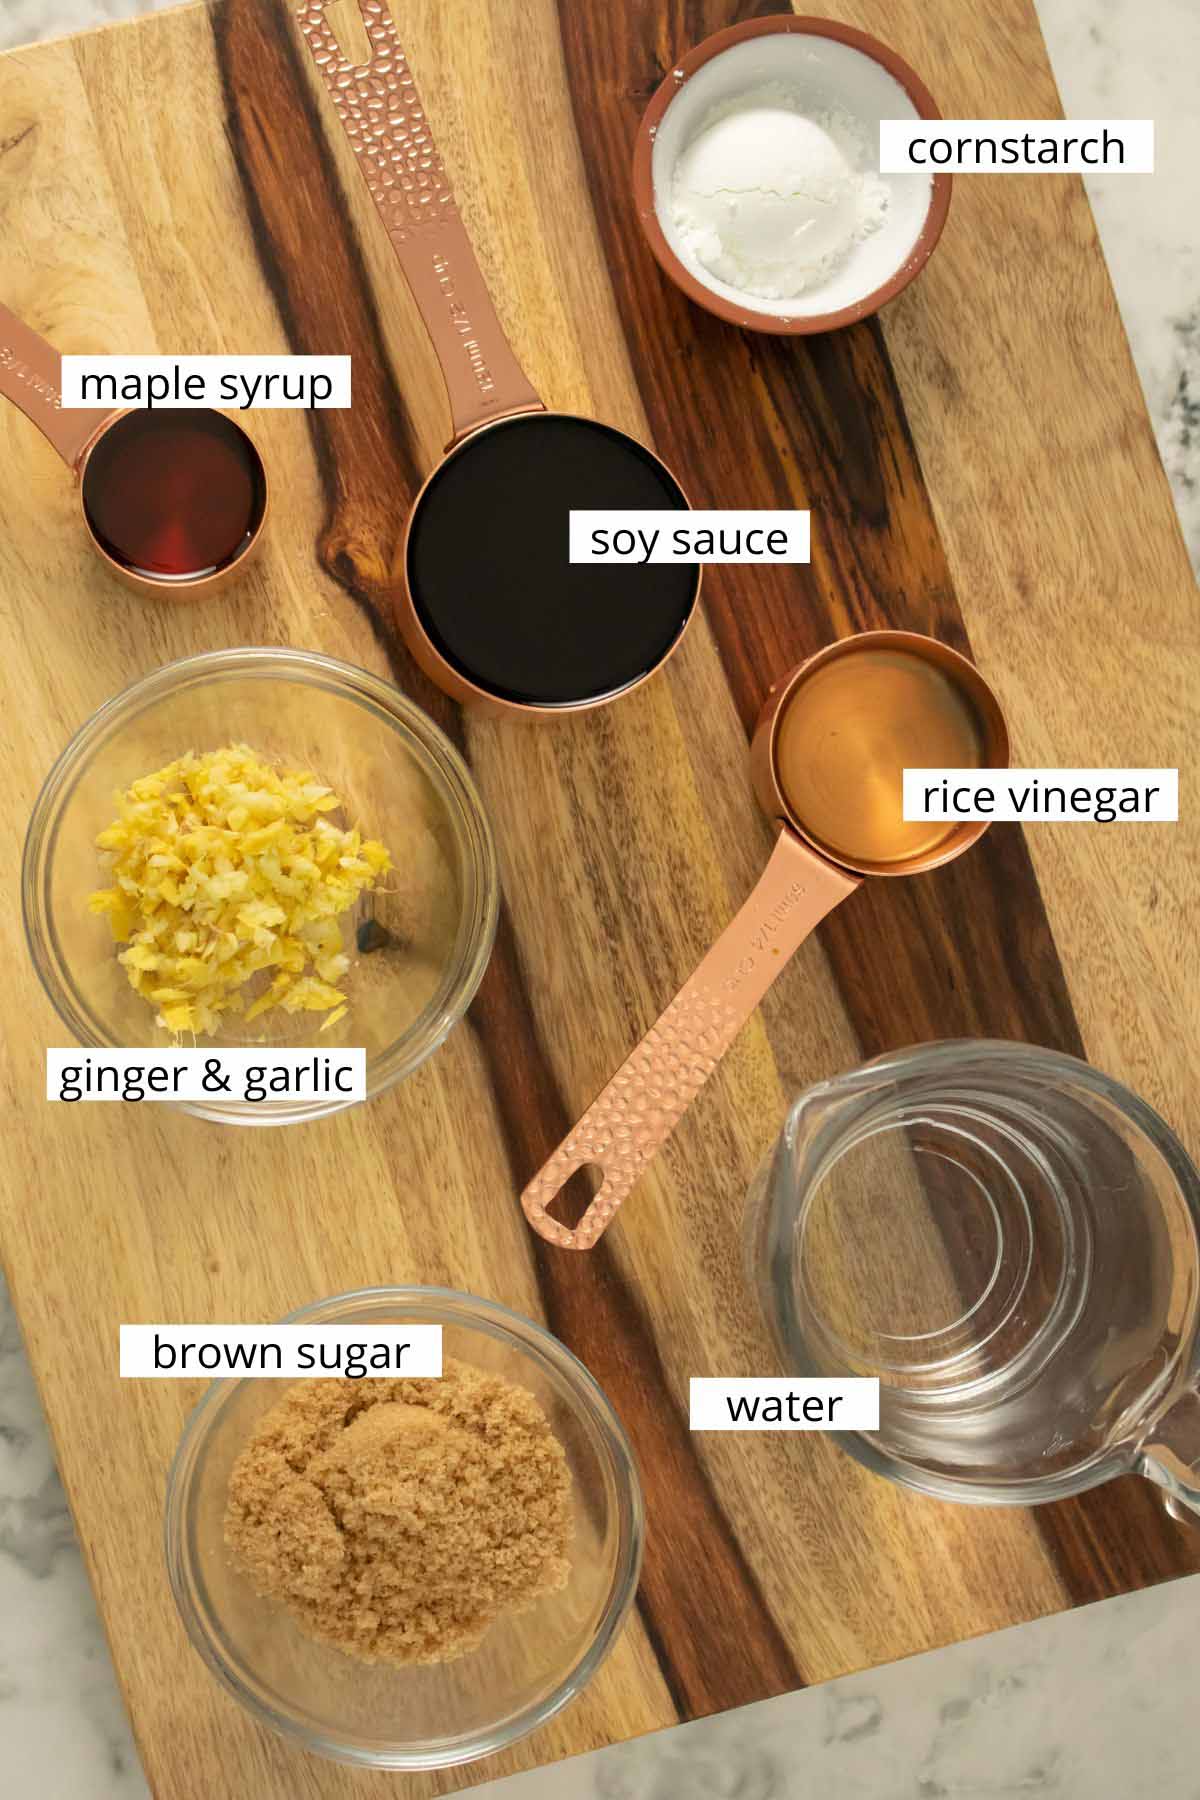 teriyaki tofu ingredients in bowls and measuring spoons on a wooden cutting board with text labels on each item